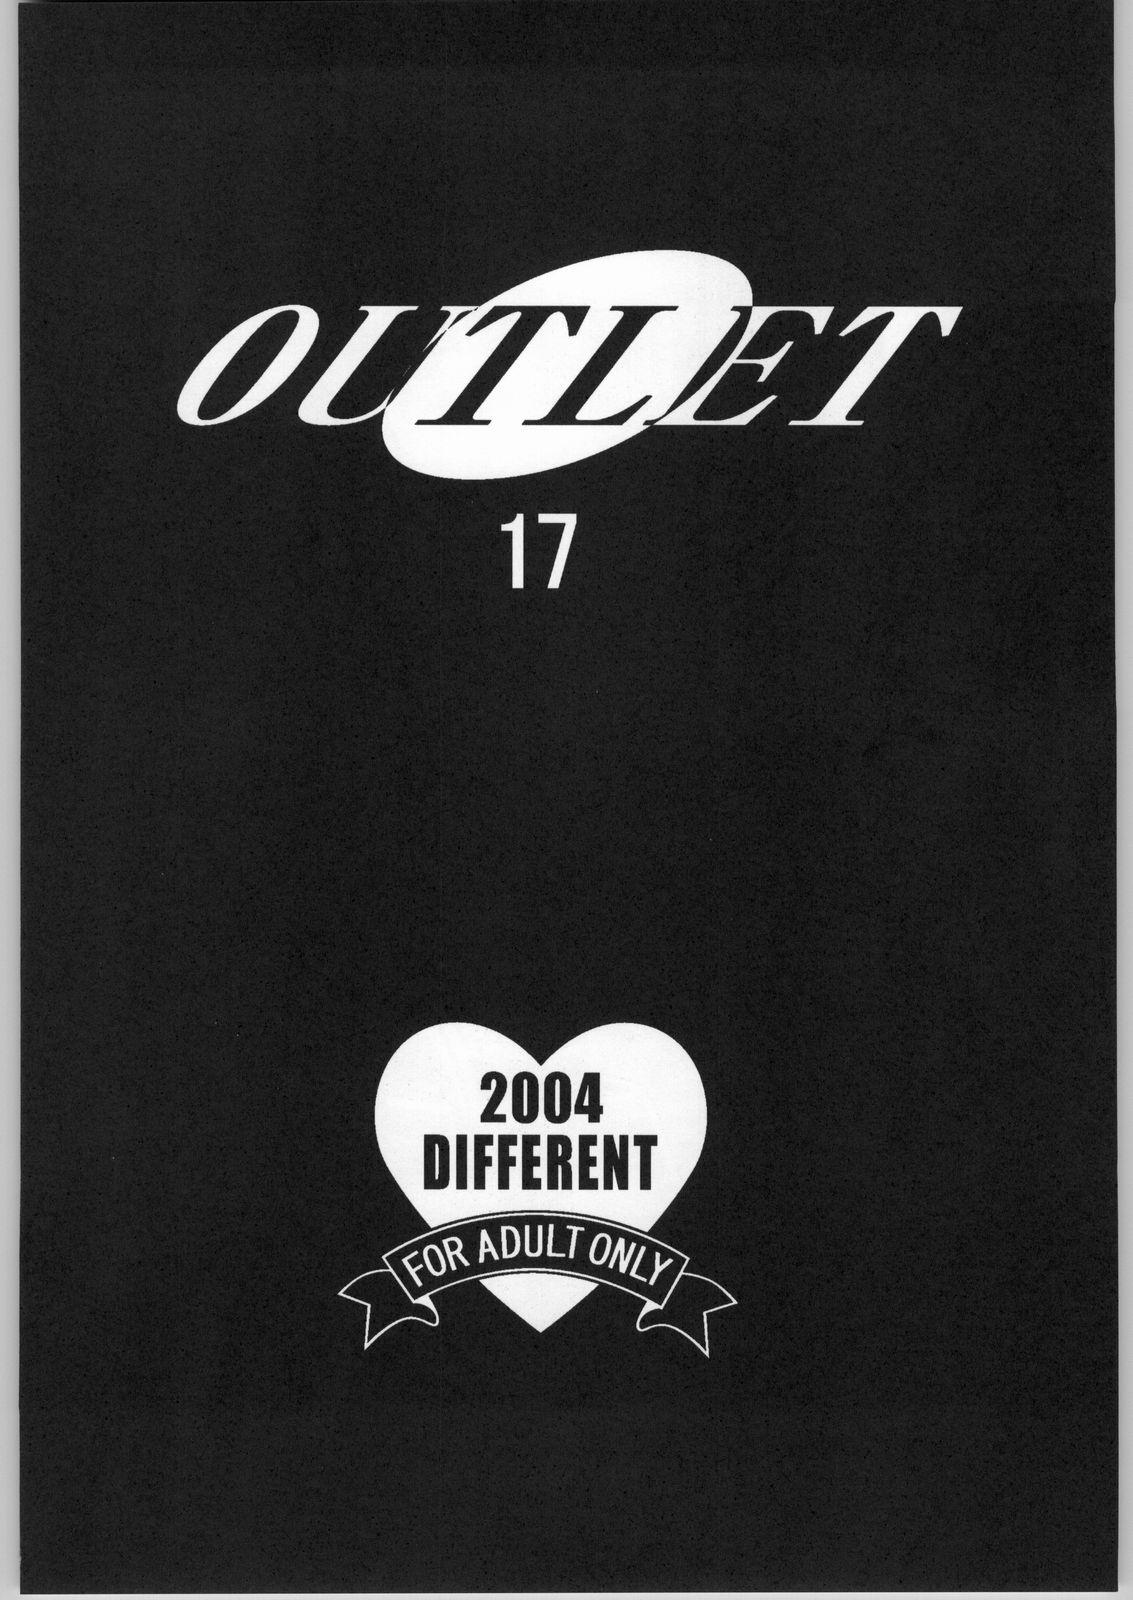 Outlet 17 50